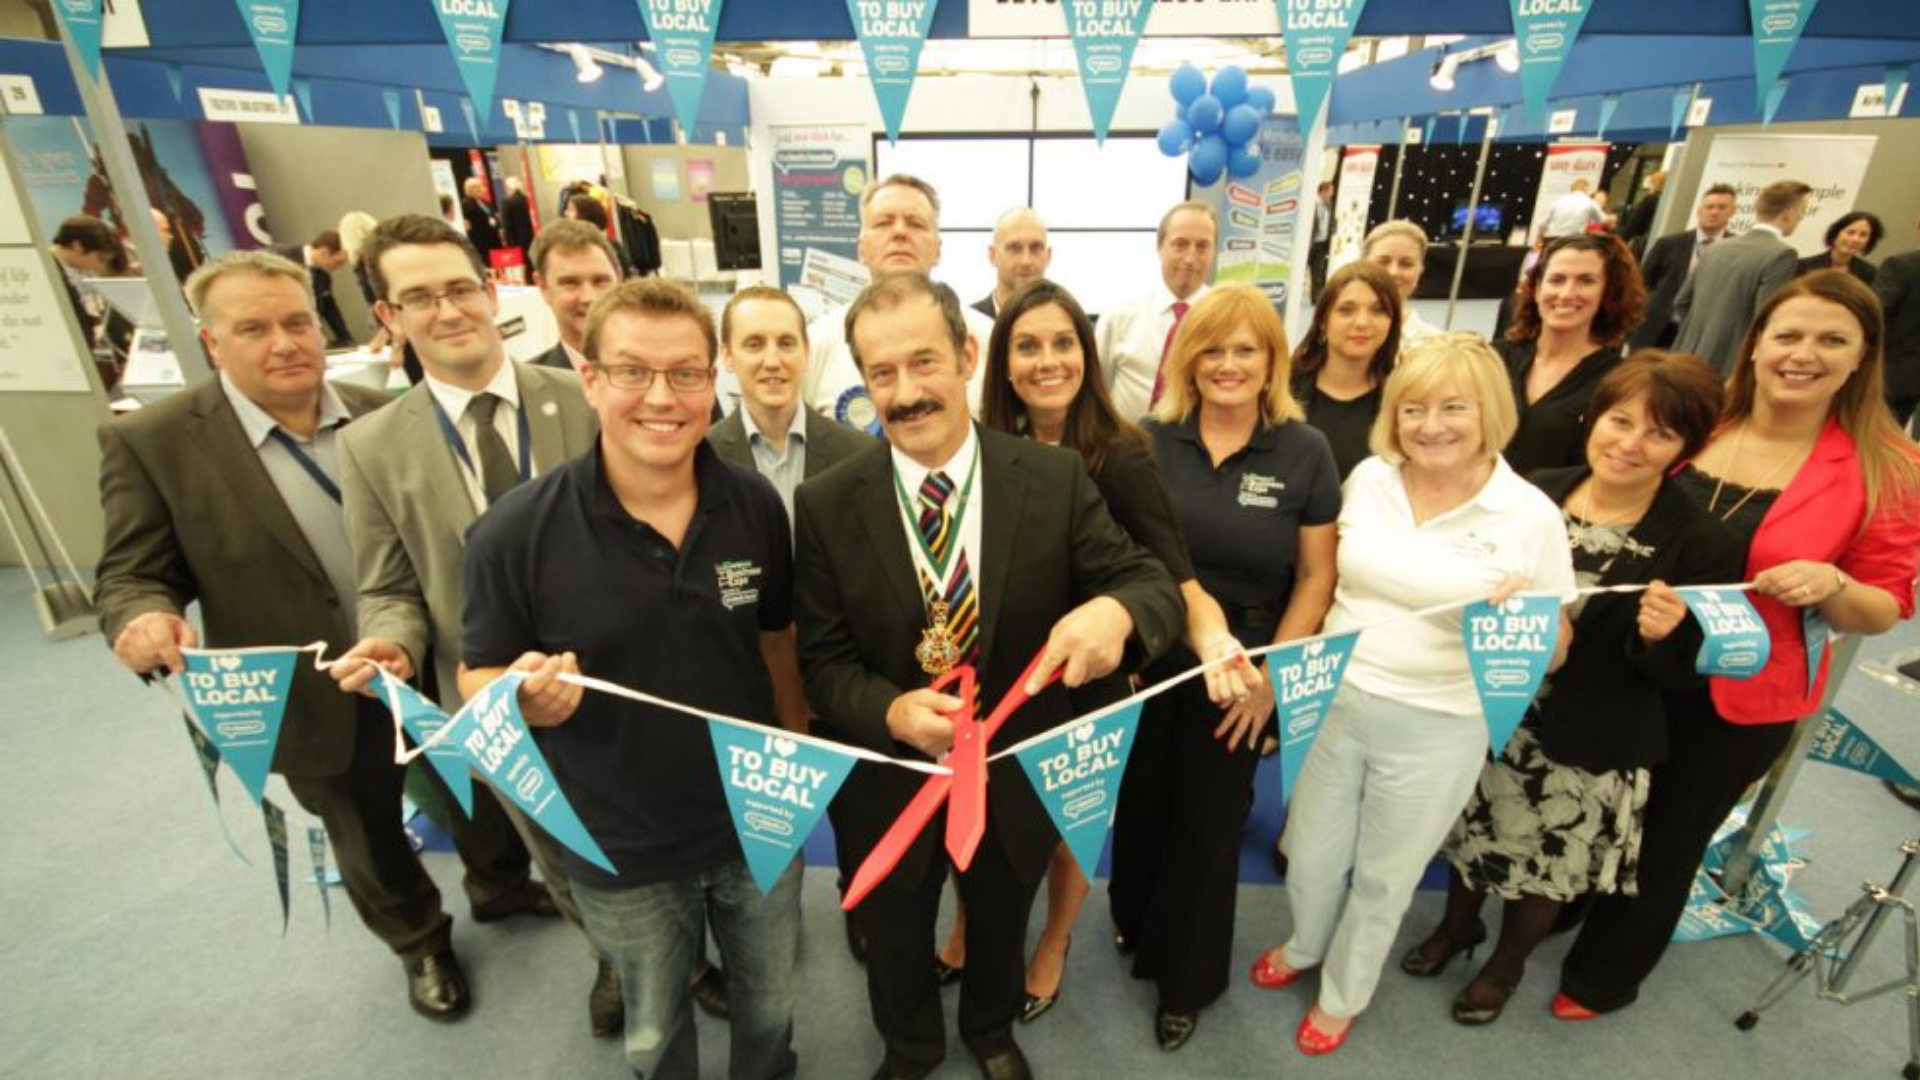 South West Business Expo 2014